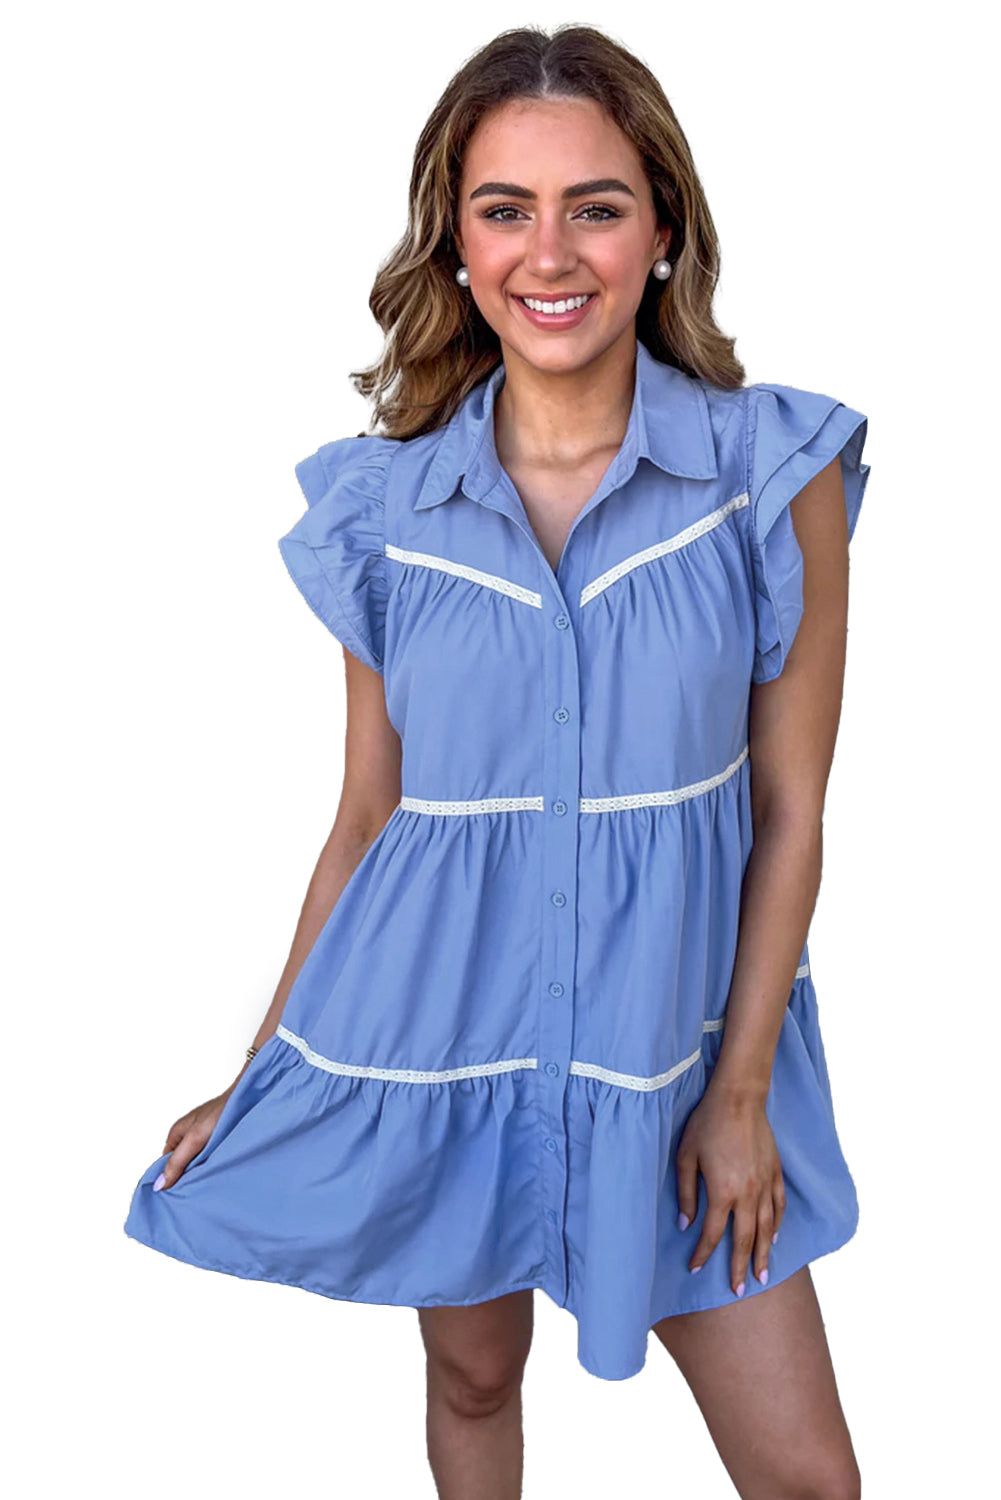 Sky Blue Lace Trim Accent Ruffled Tiered Dress